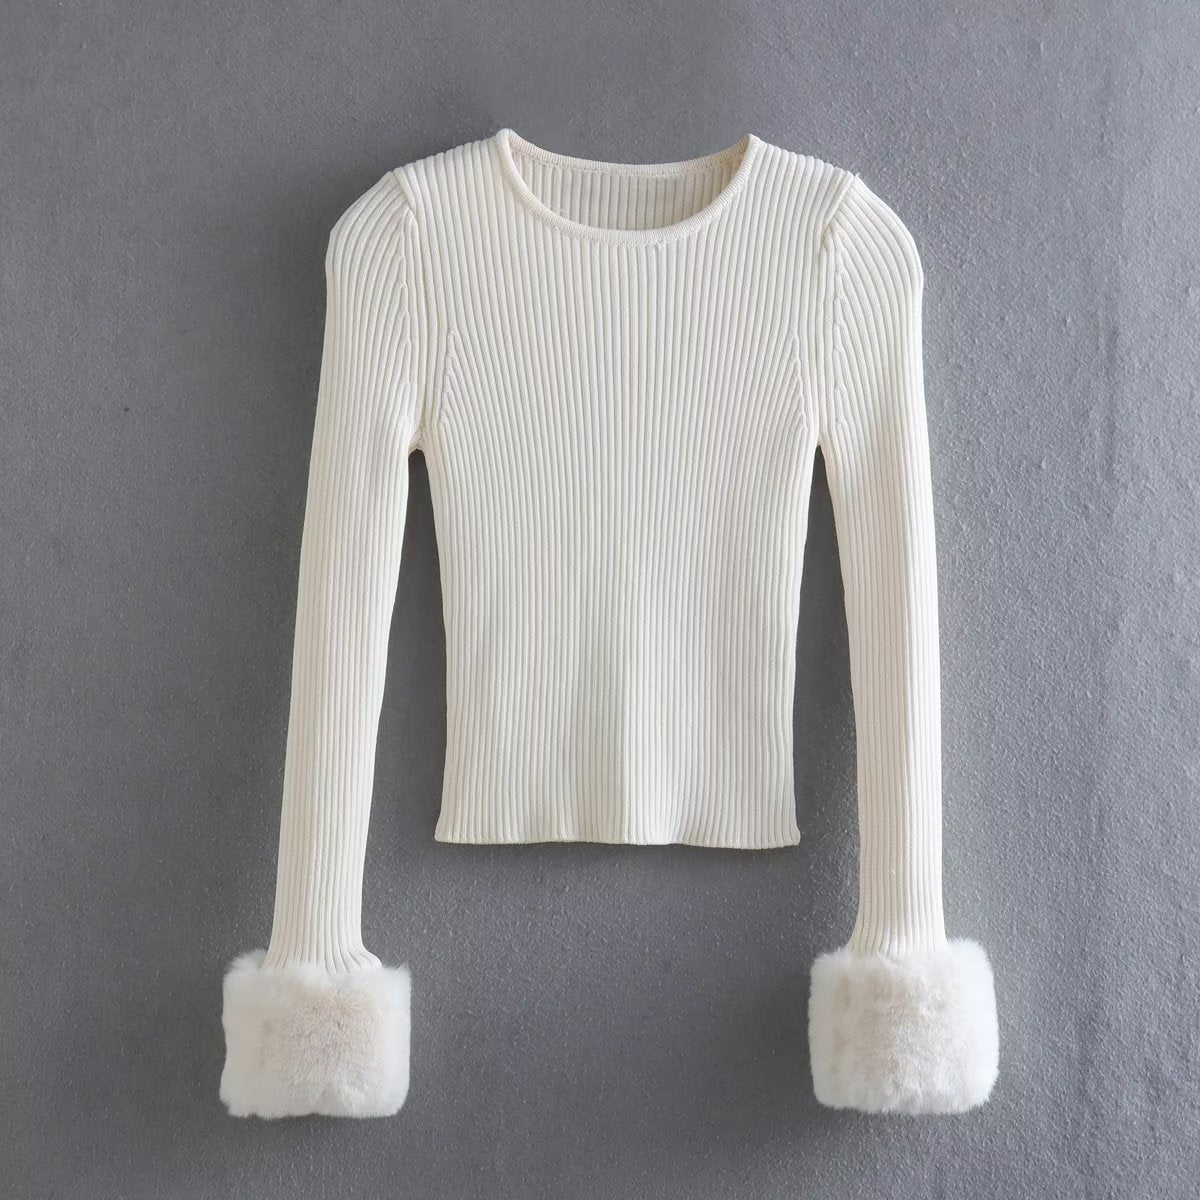 Autumn Winter Women Clothing Cuff Colored Pullover Sweater Knitwear